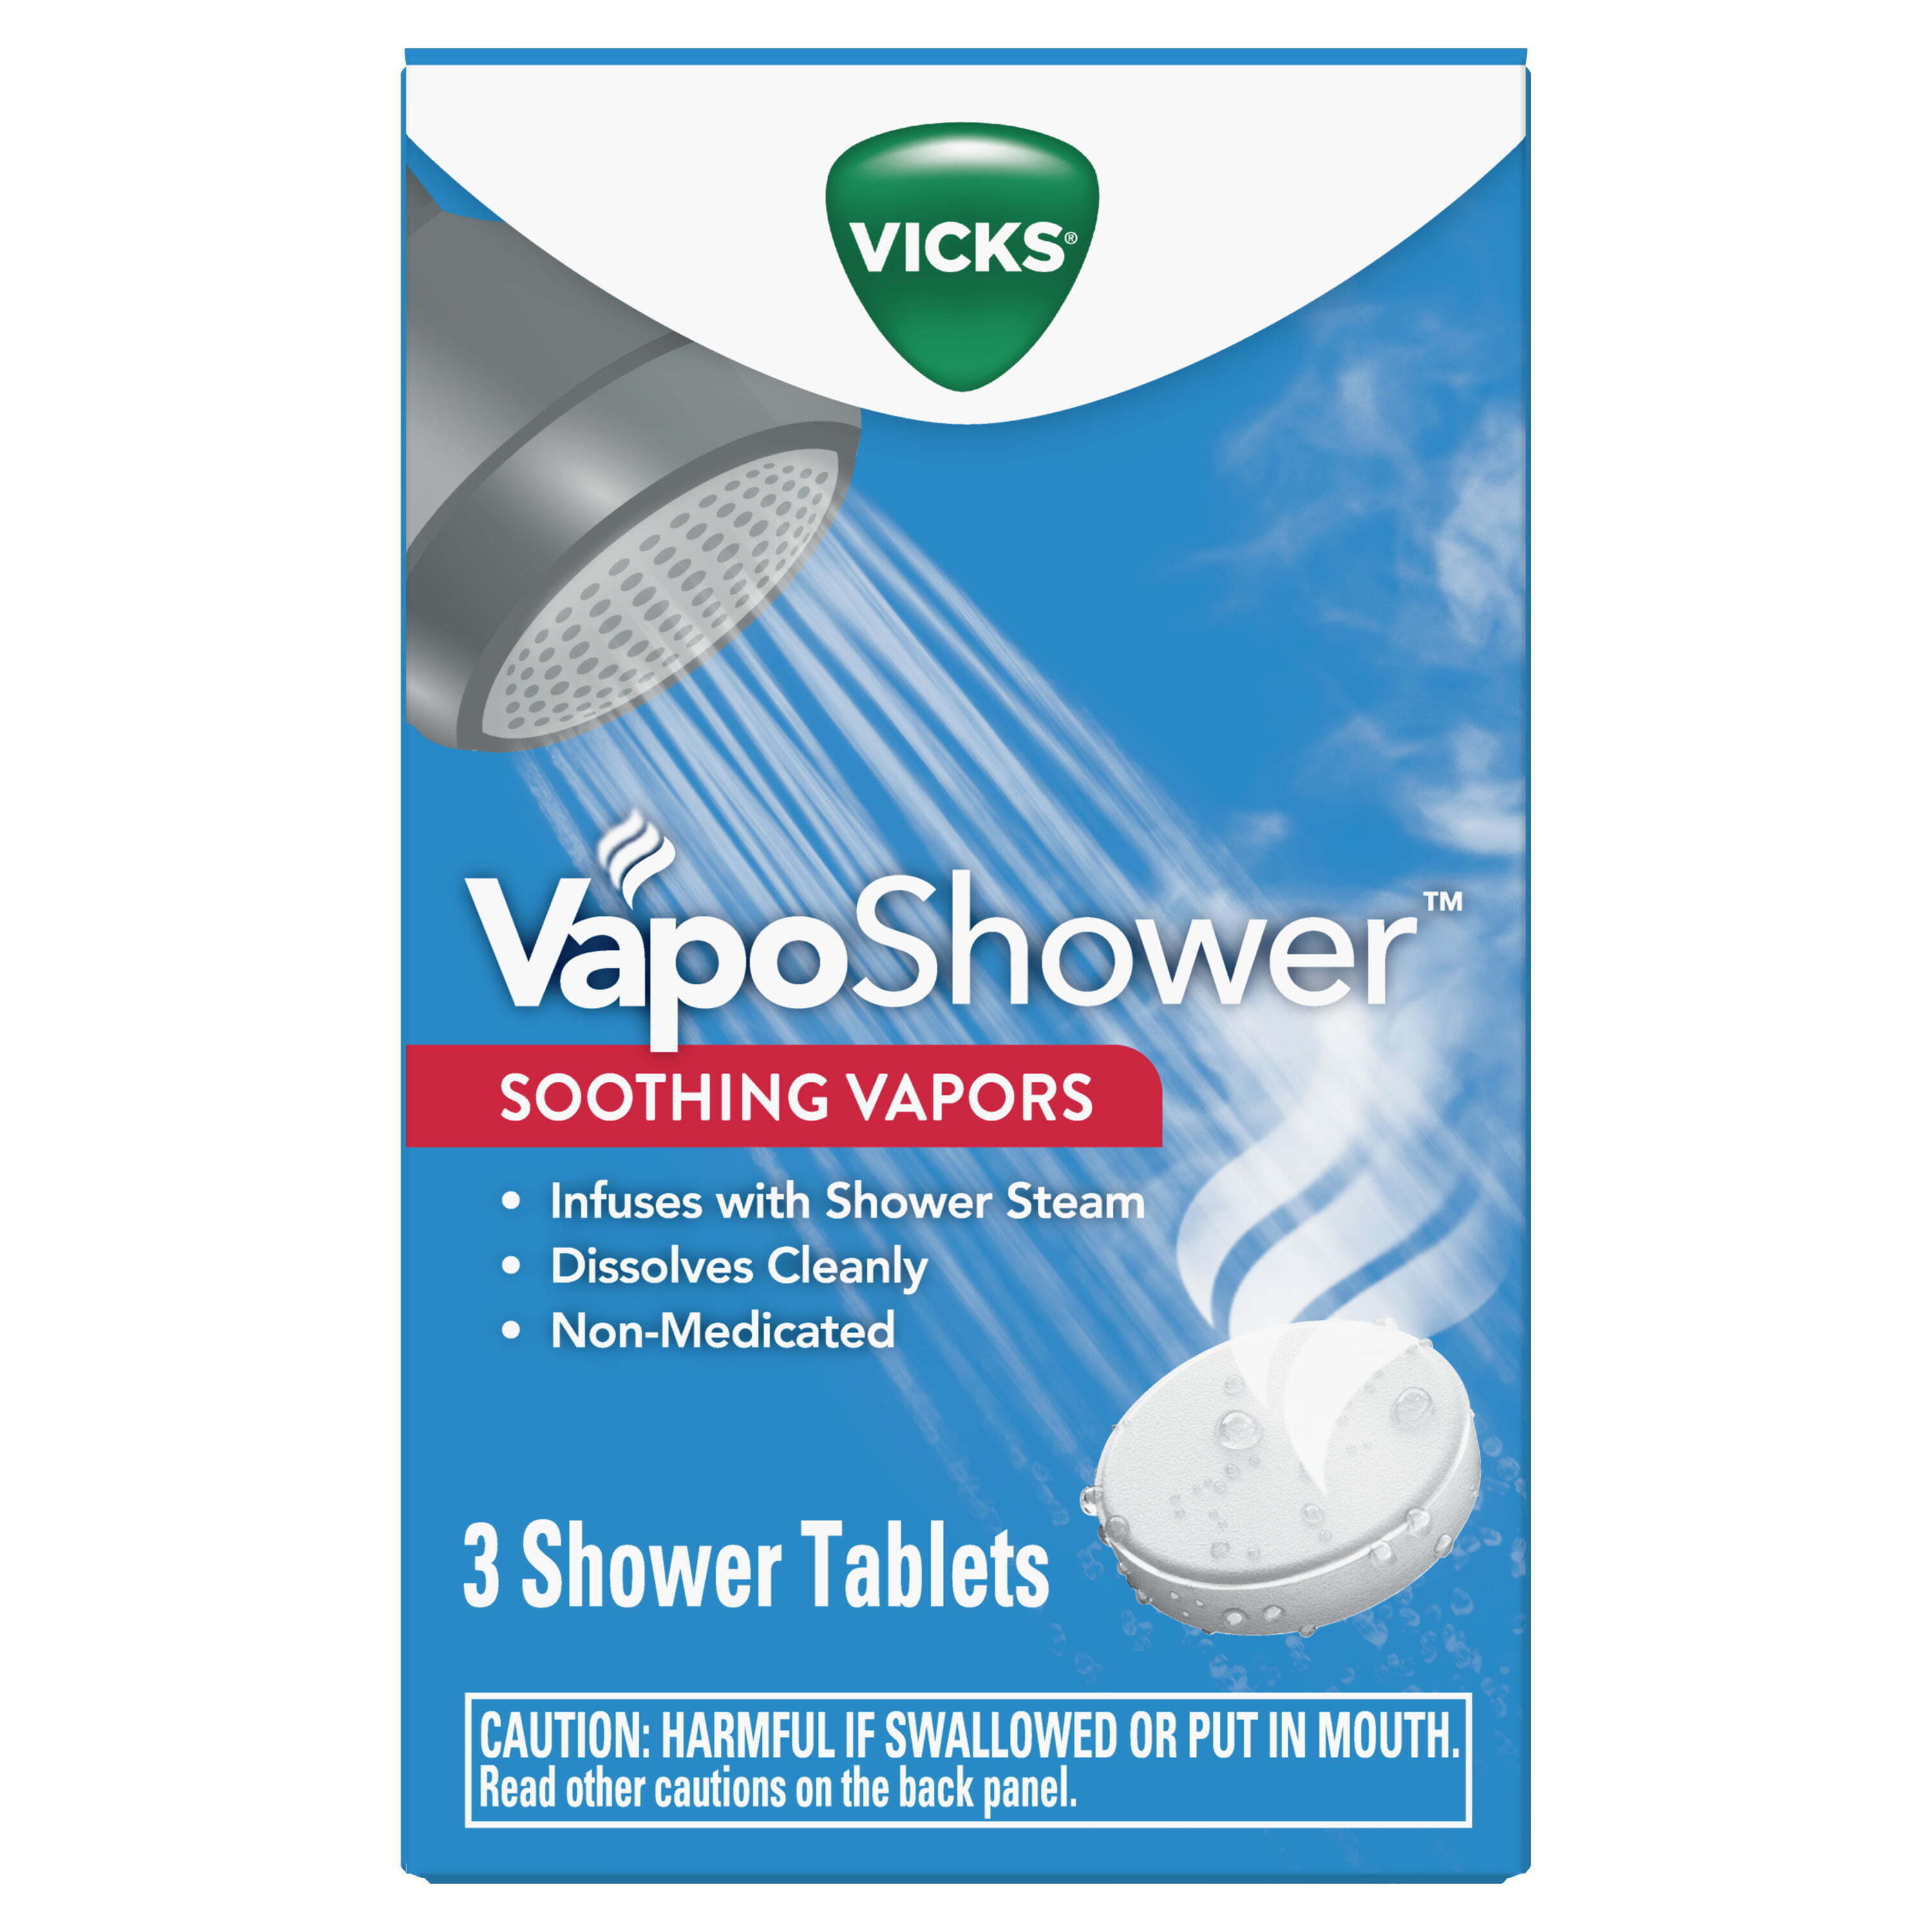 Vicks Vapo Shower, Dissolvable Shower Tablets for Cold Relief, Soothing and Non-Medicated, 3 Ct - image 10 of 10